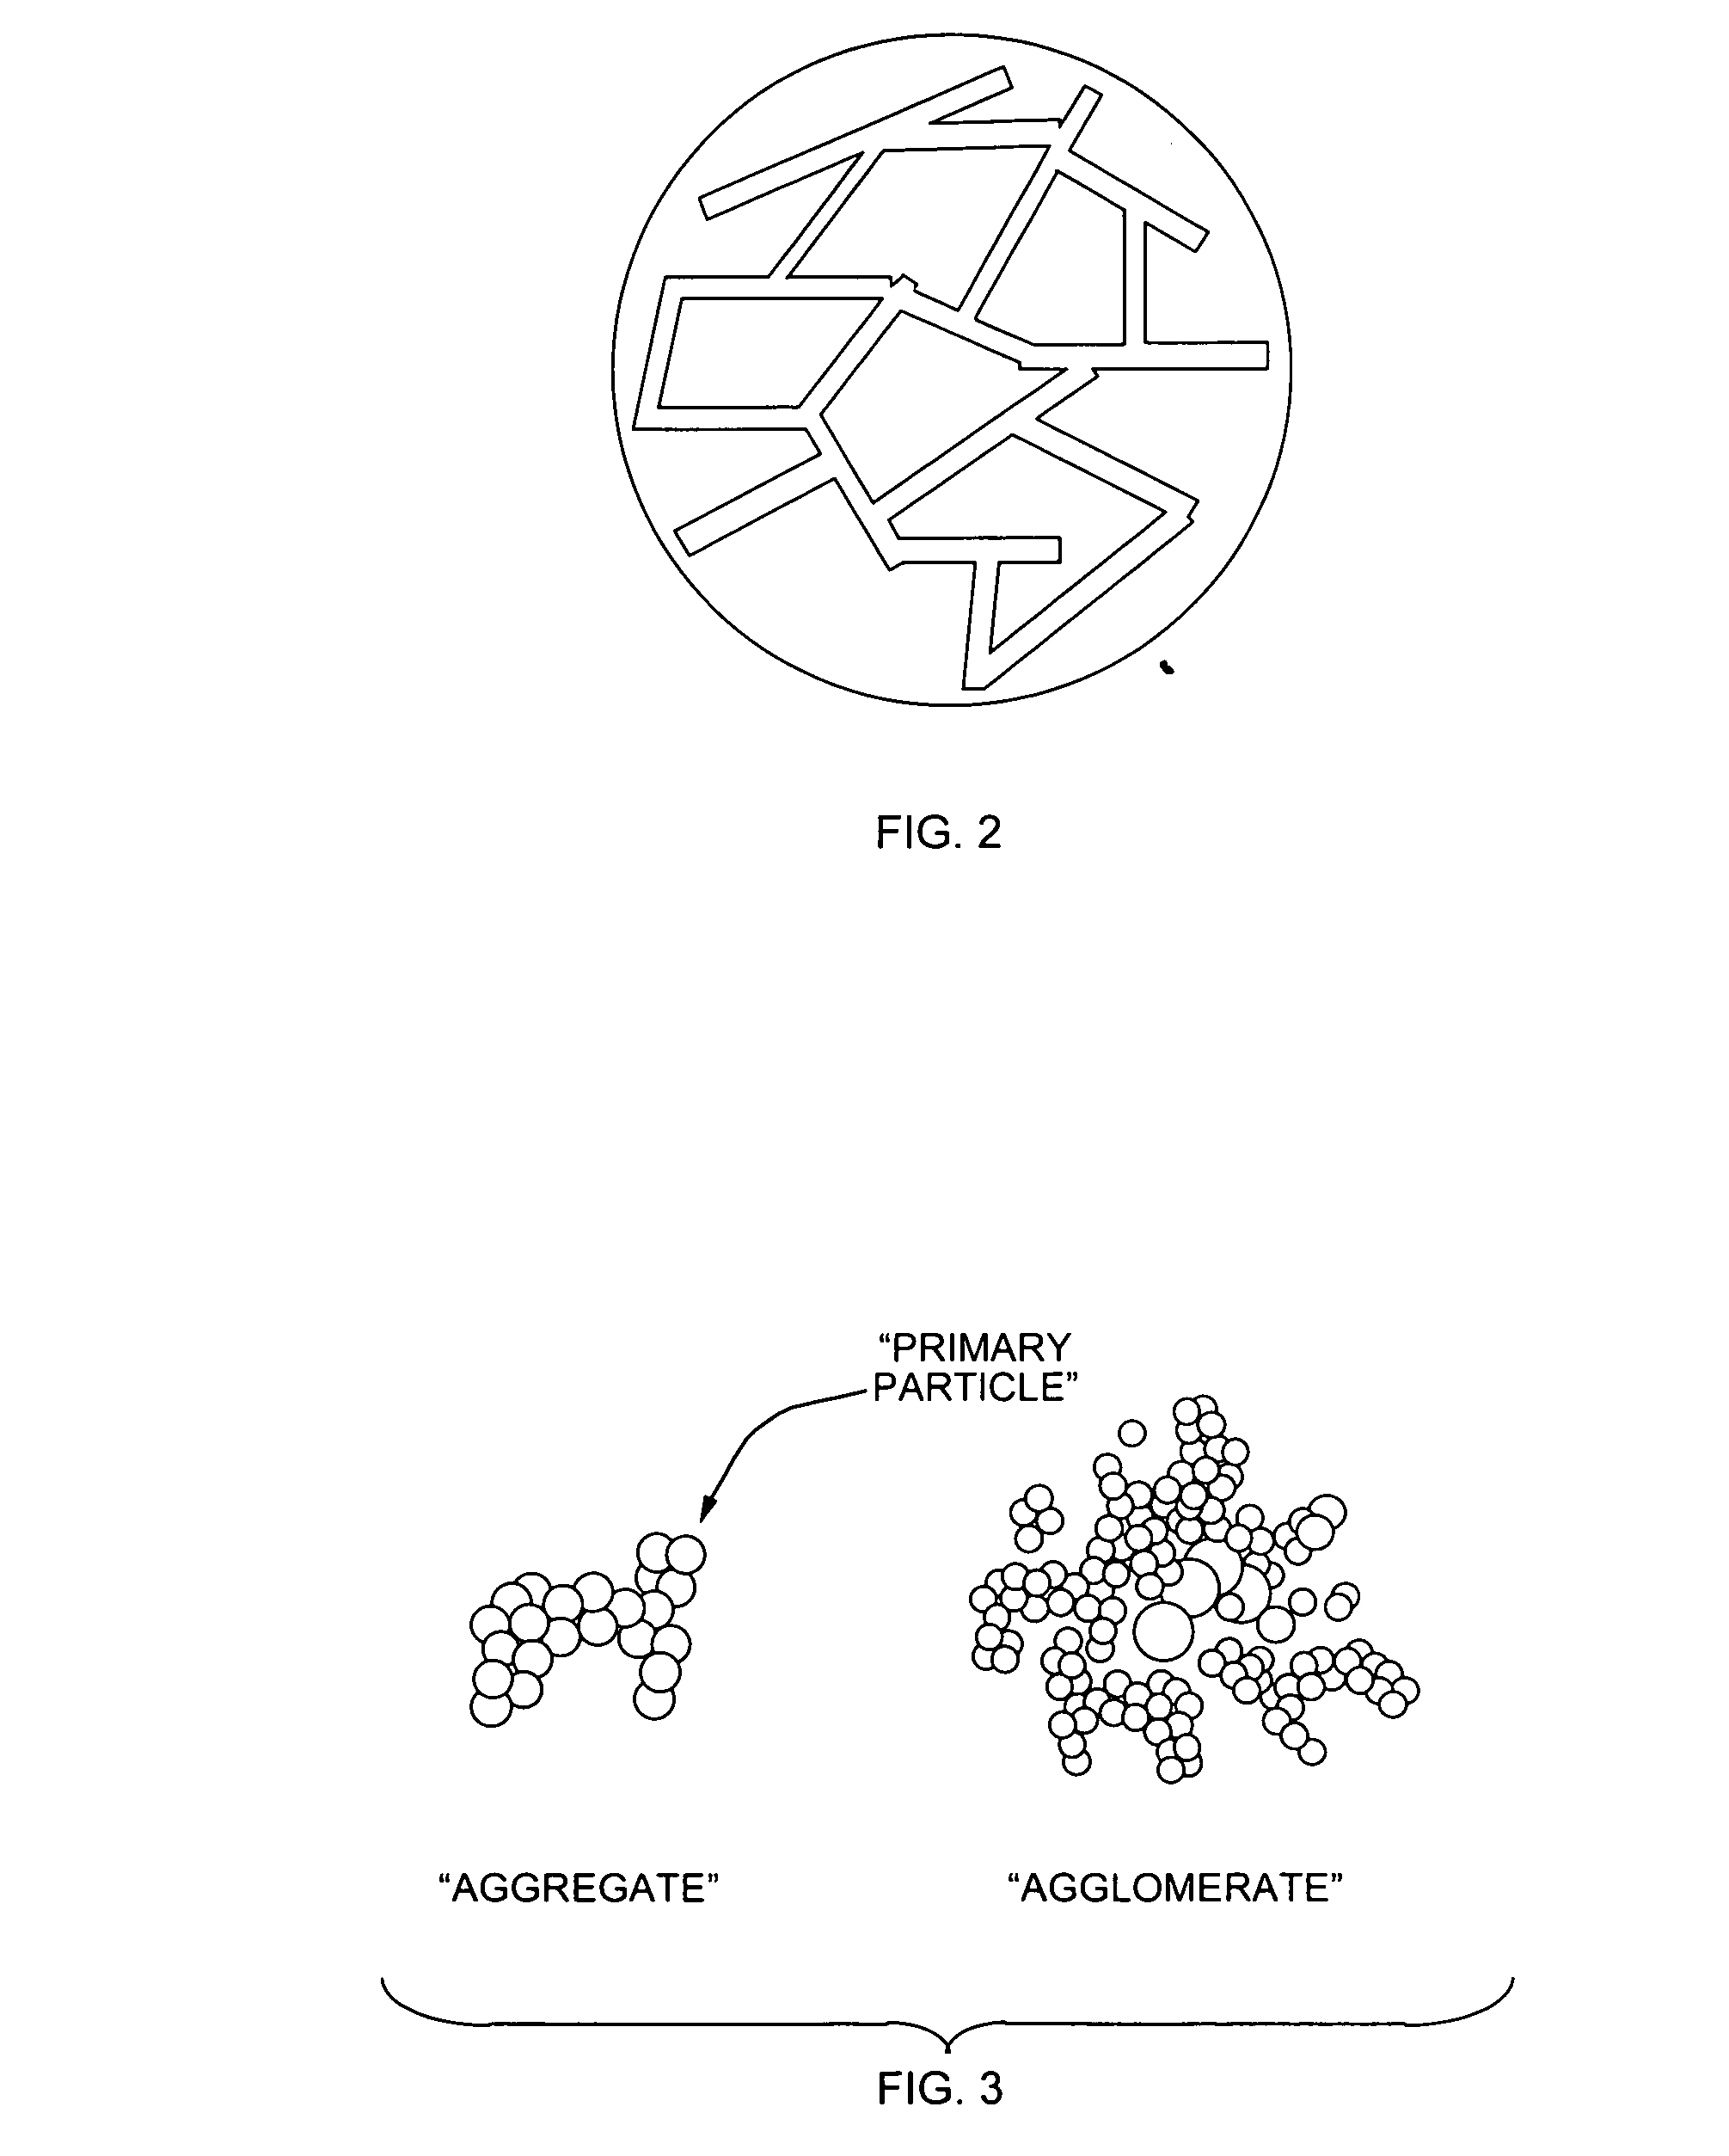 Thermoset nanocomposite particles, processing for their production, and their use in oil and natural gas drilling applications